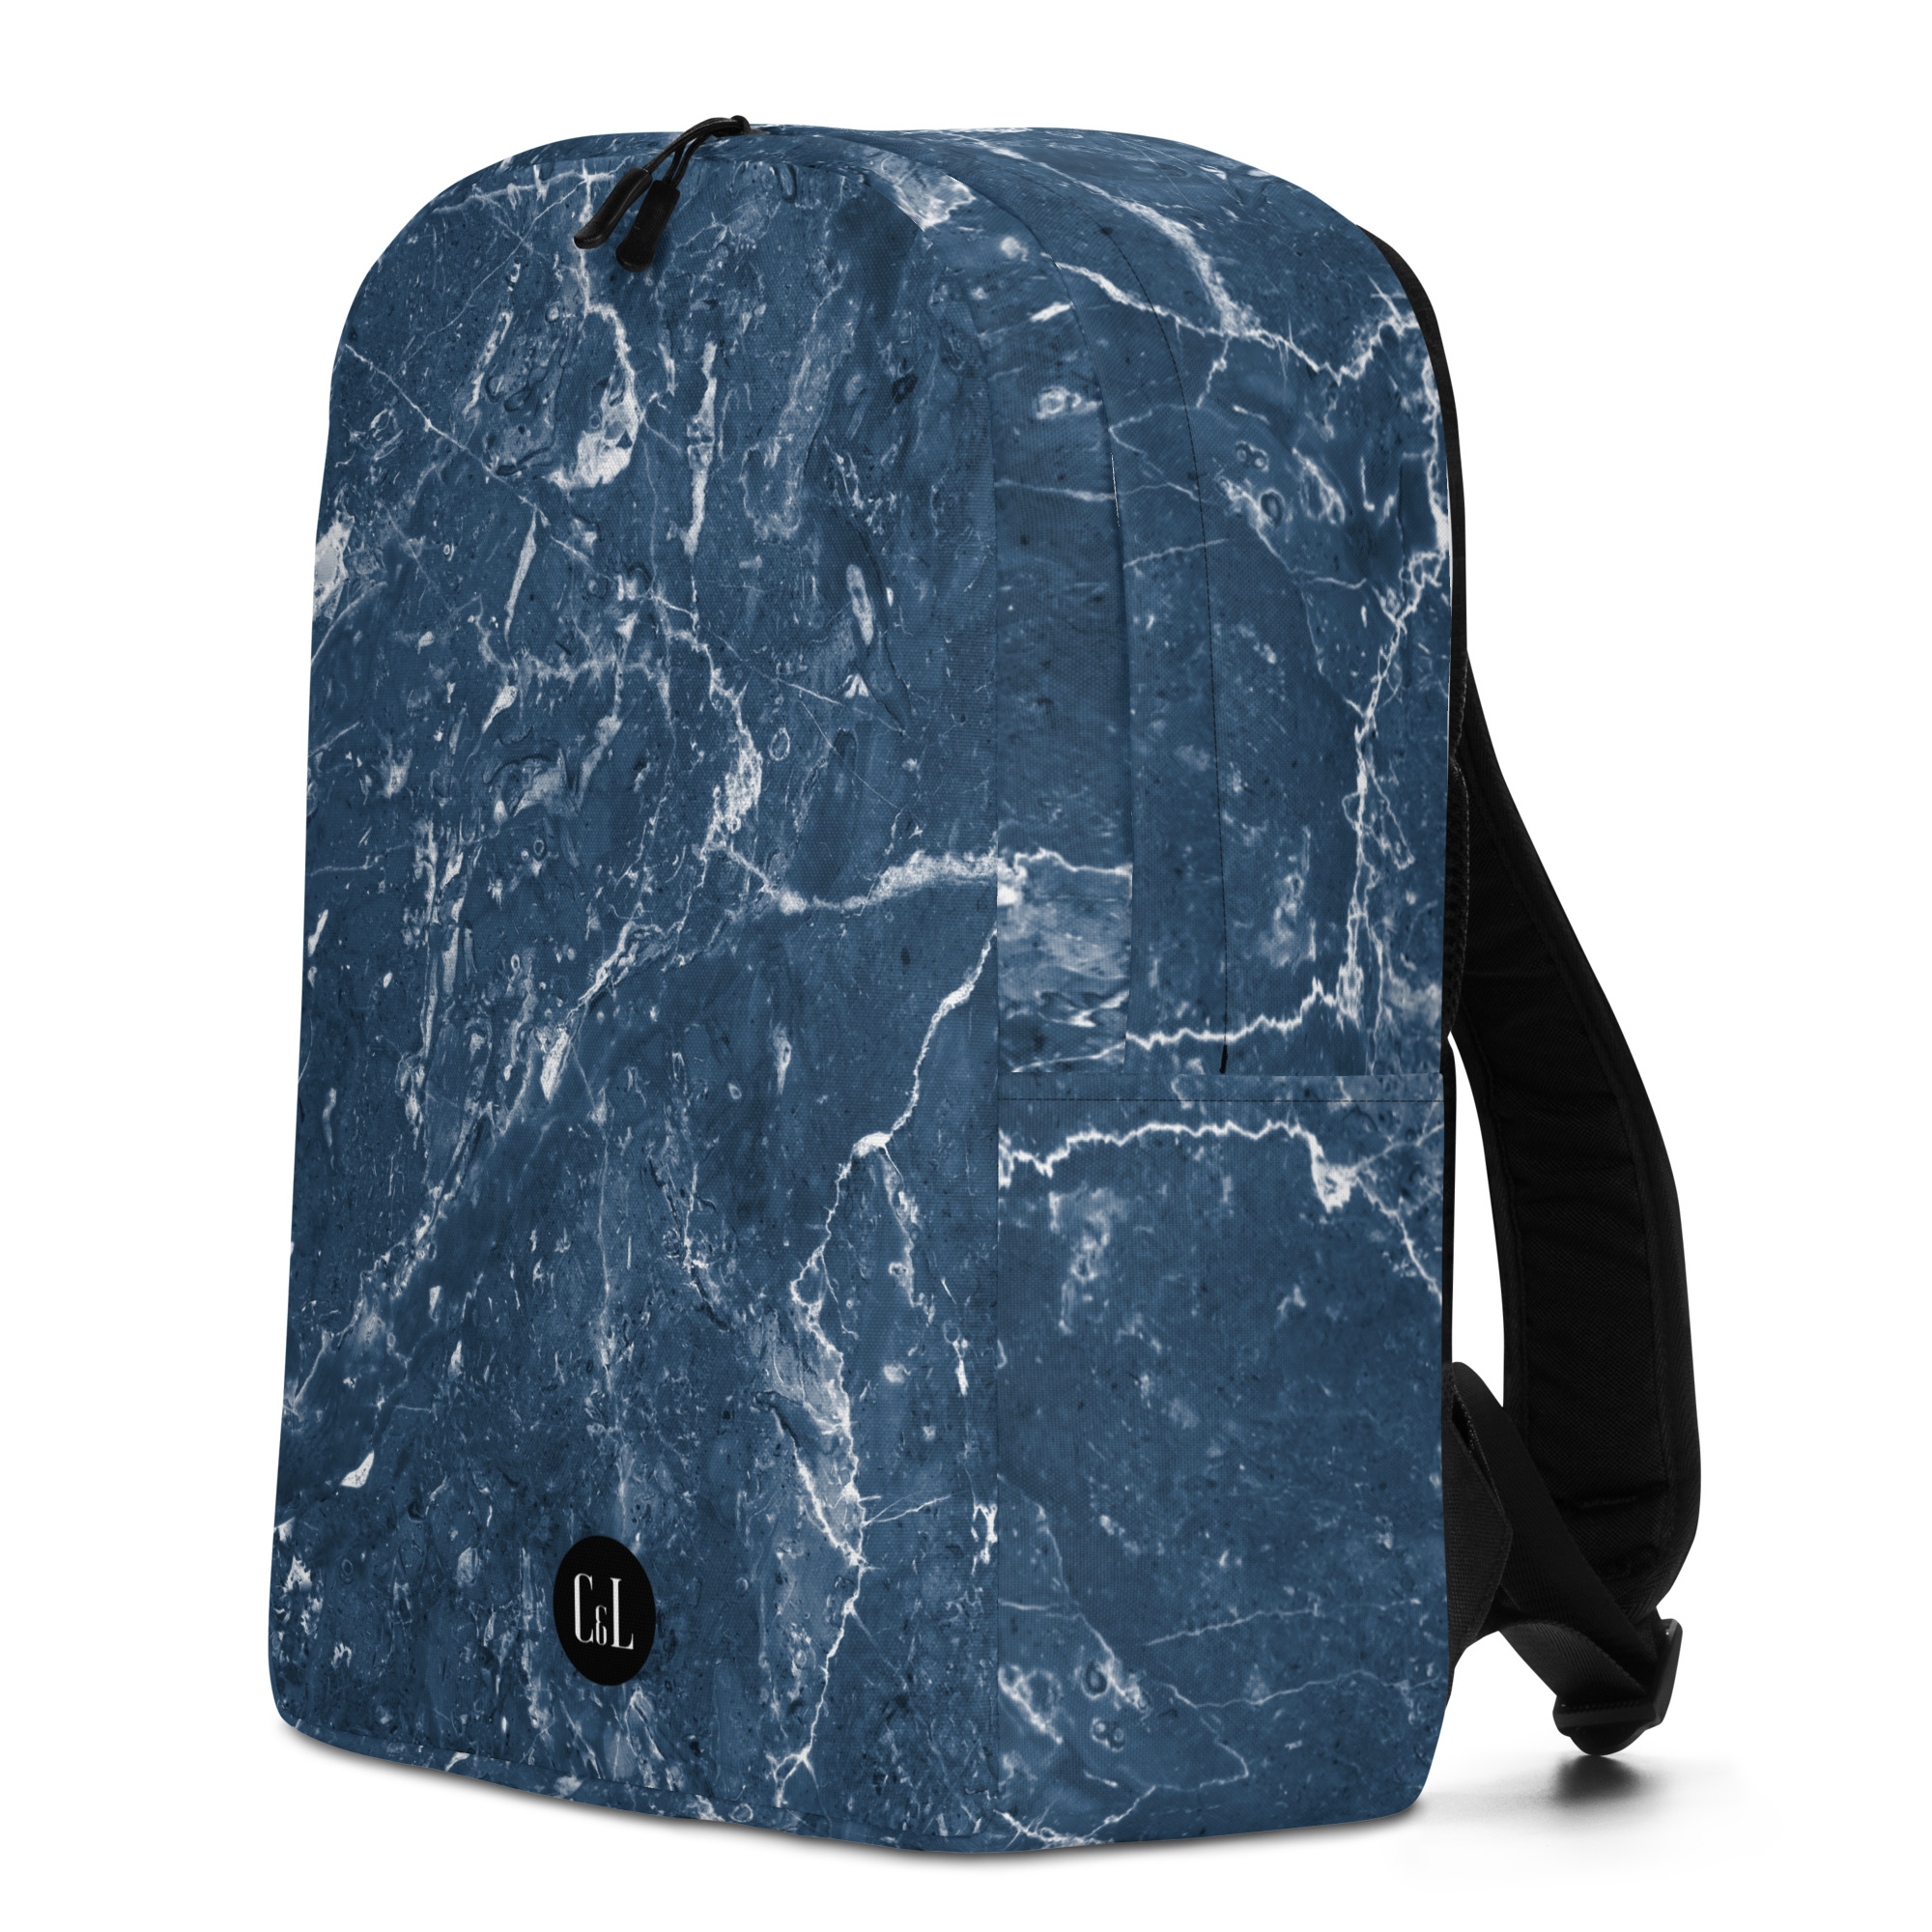 all-over-print-minimalist-backpack-white-left-6480517a92a1b.jpg